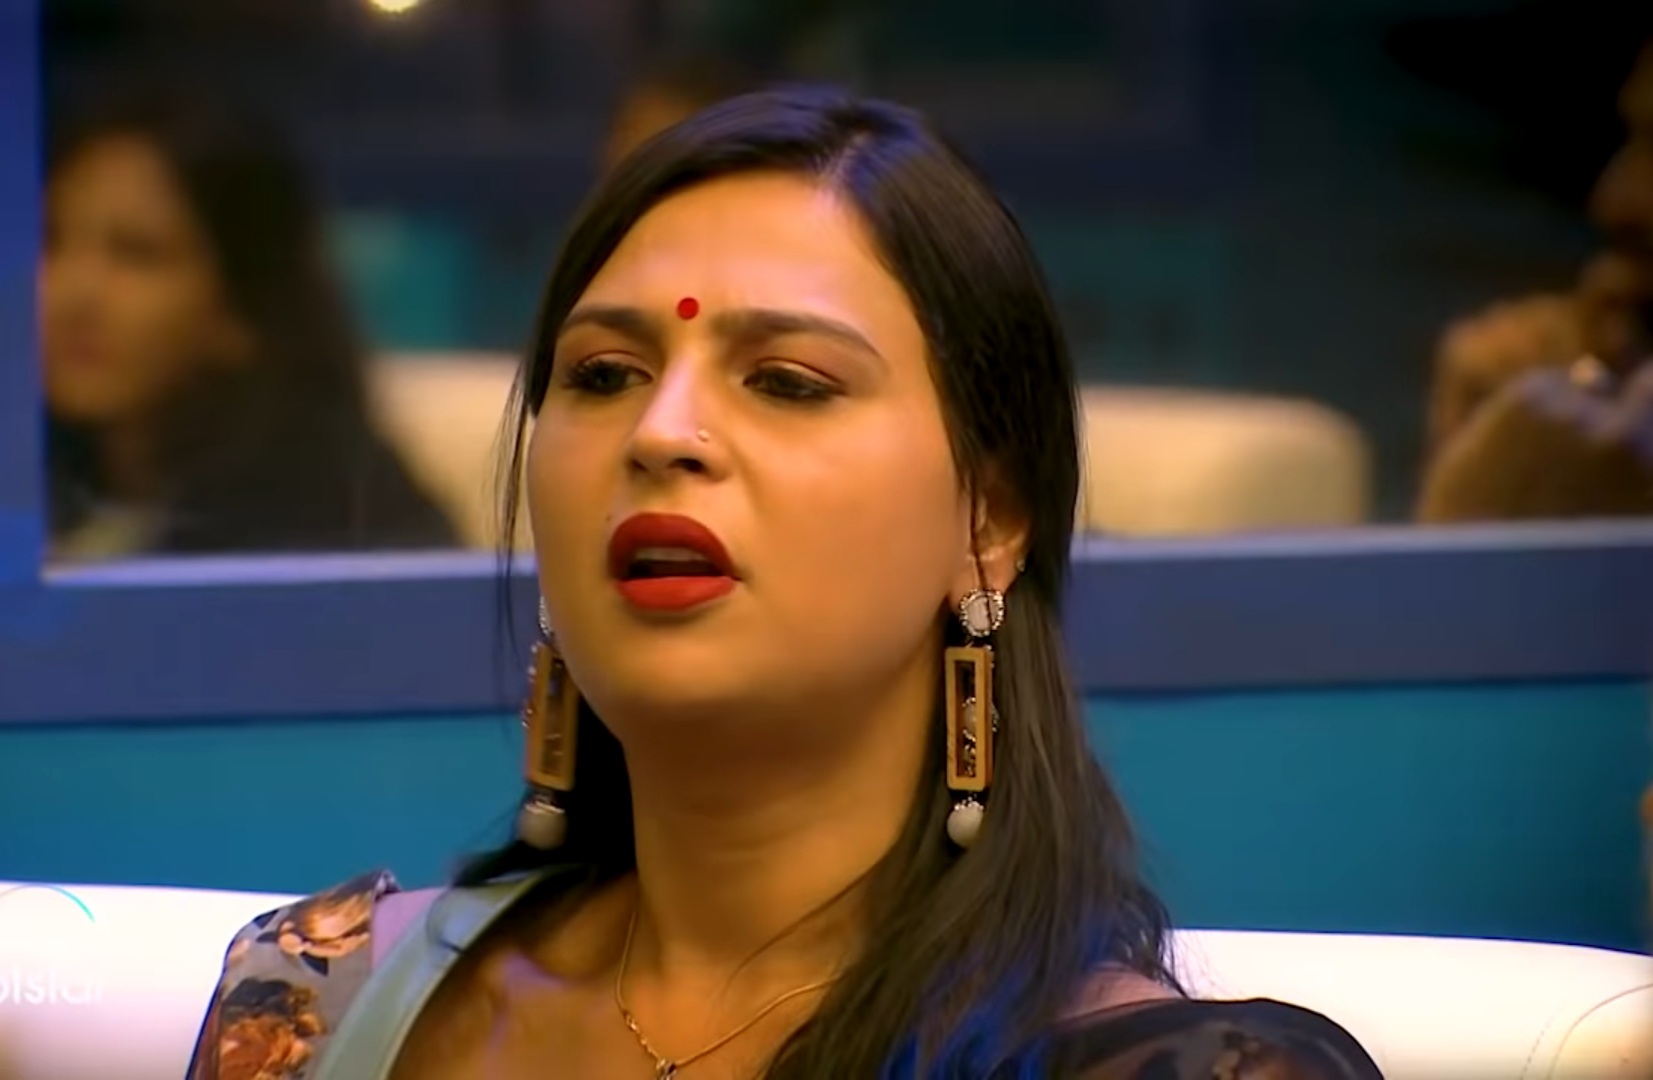 why Namitha went out seen her another face biggboss abishek video